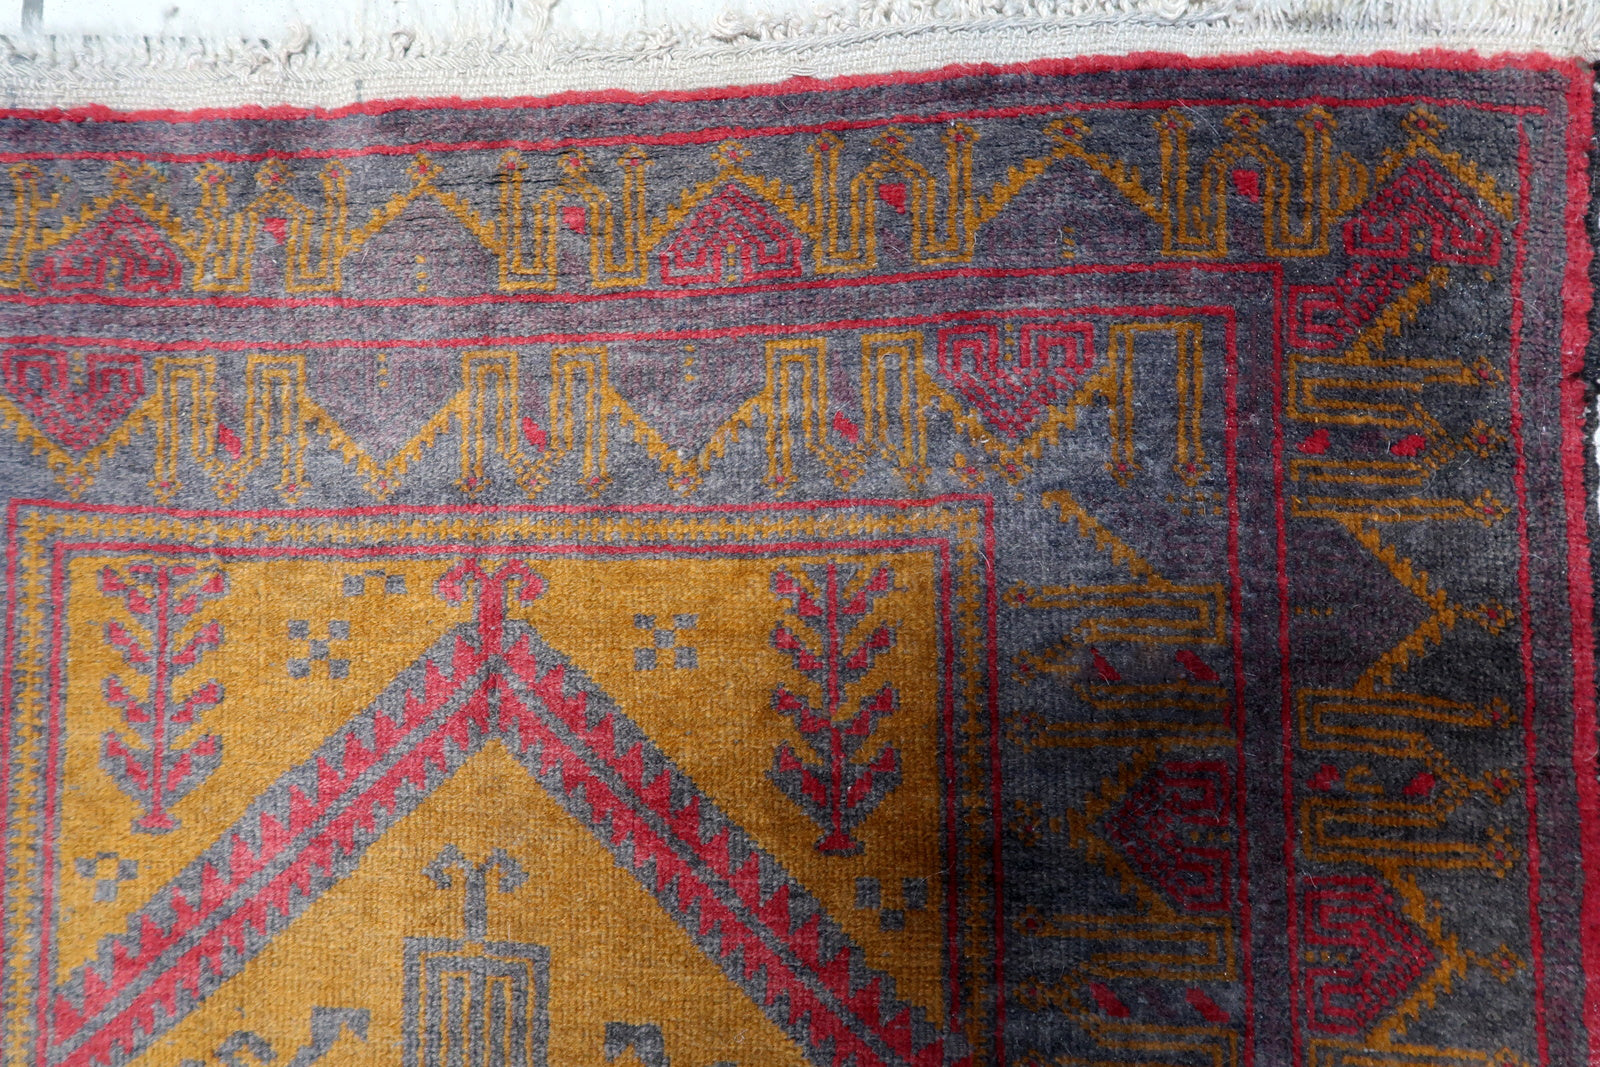 Intricate geometric patterns and tribal influences on the Afghan Baluch rug